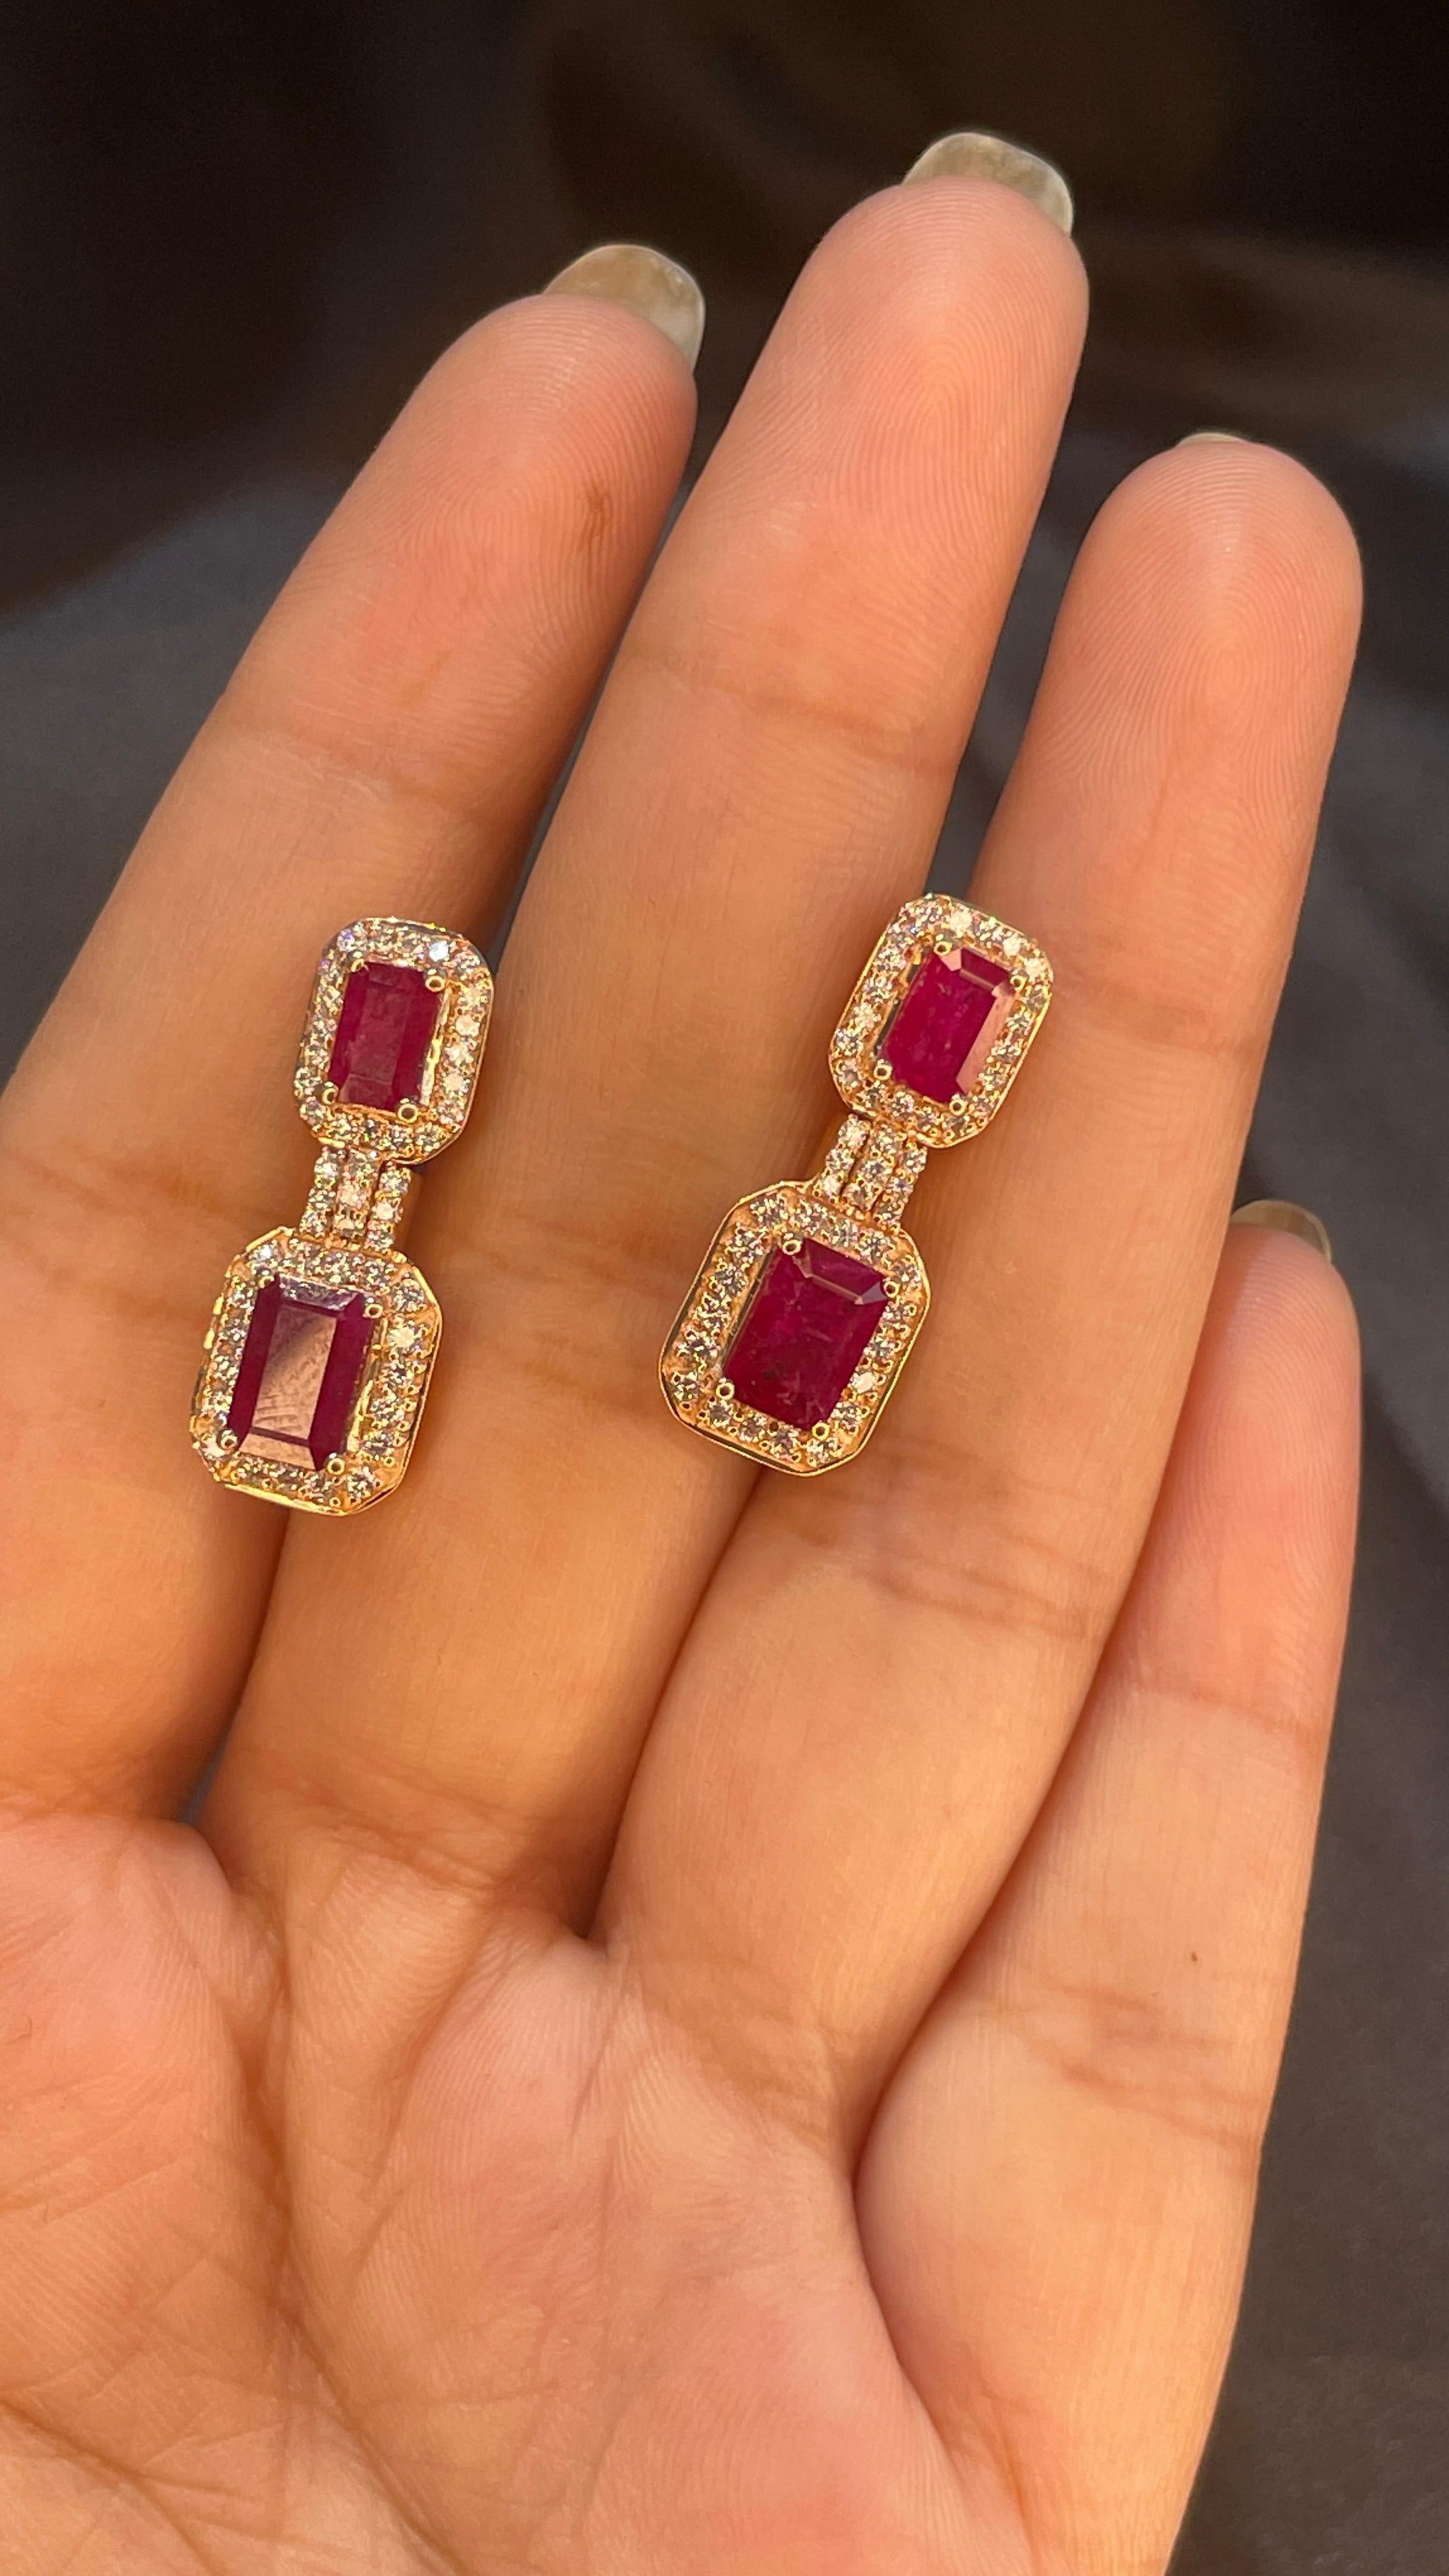 Ruby Dangle earrings to make a statement with your look. These earrings create a sparkling, luxurious look featuring octagon cut gemstone.
If you love to gravitate towards unique styles, this piece of jewelry is perfect for you.

PRODUCT DETAILS